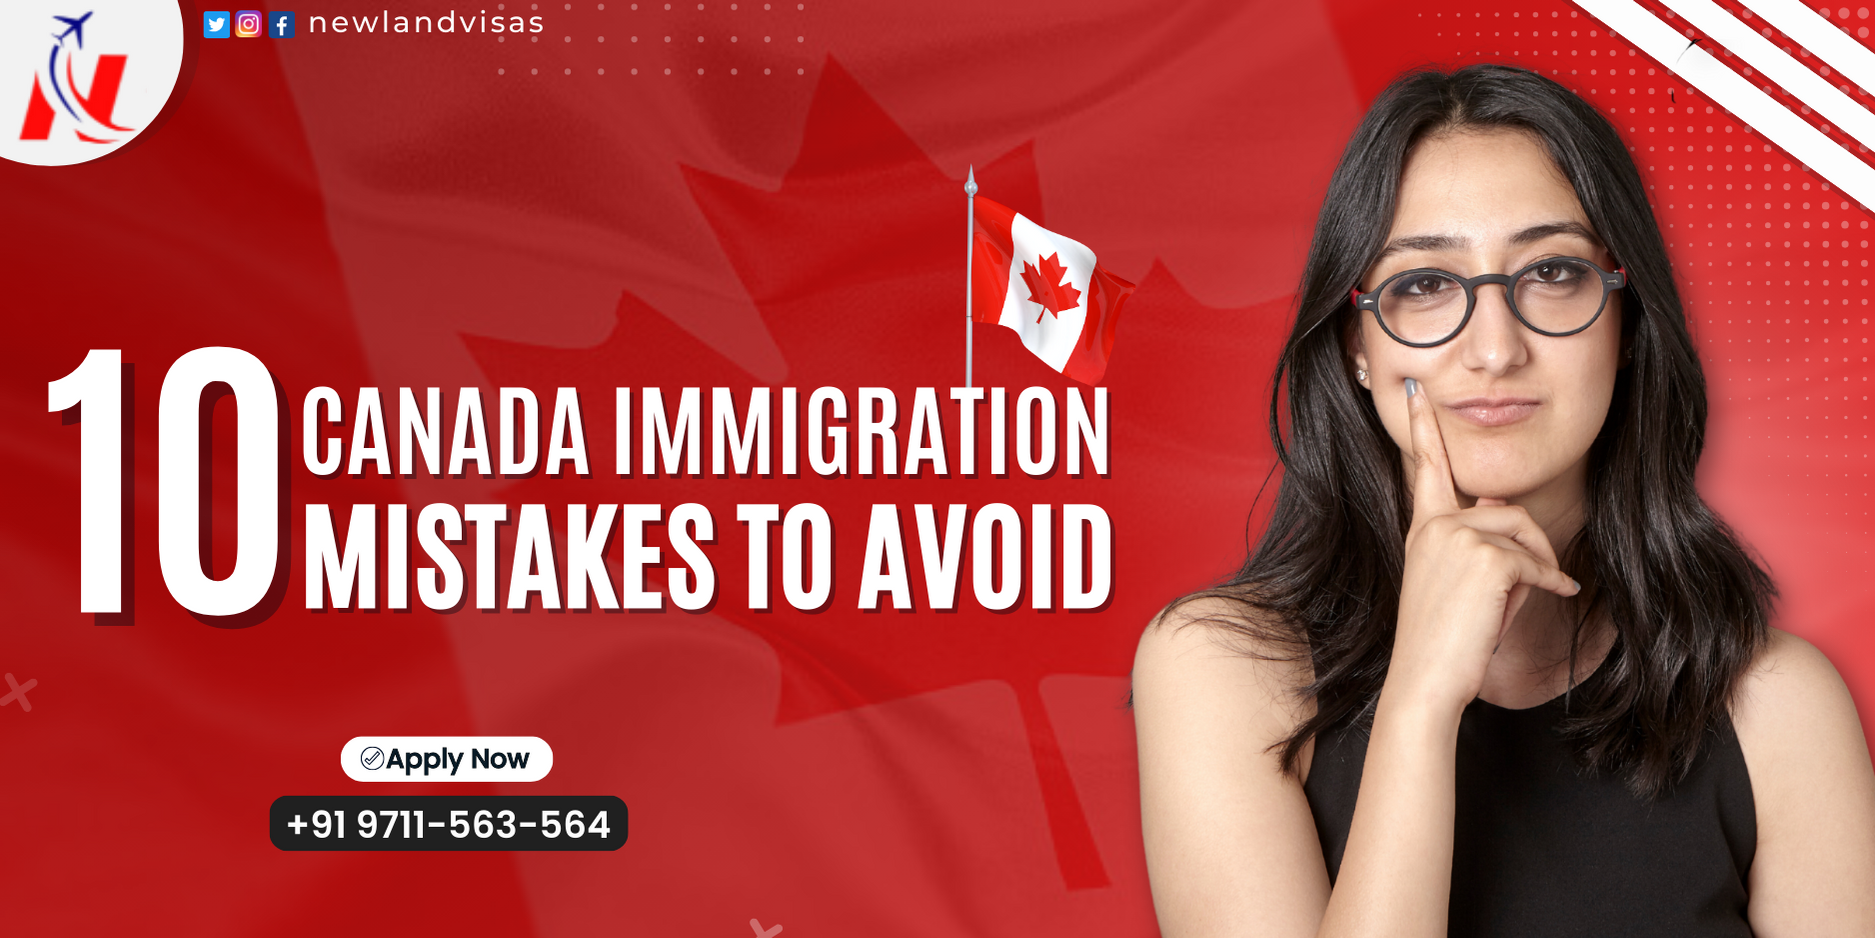 10 Canada Immigration Mistakes to Avoid